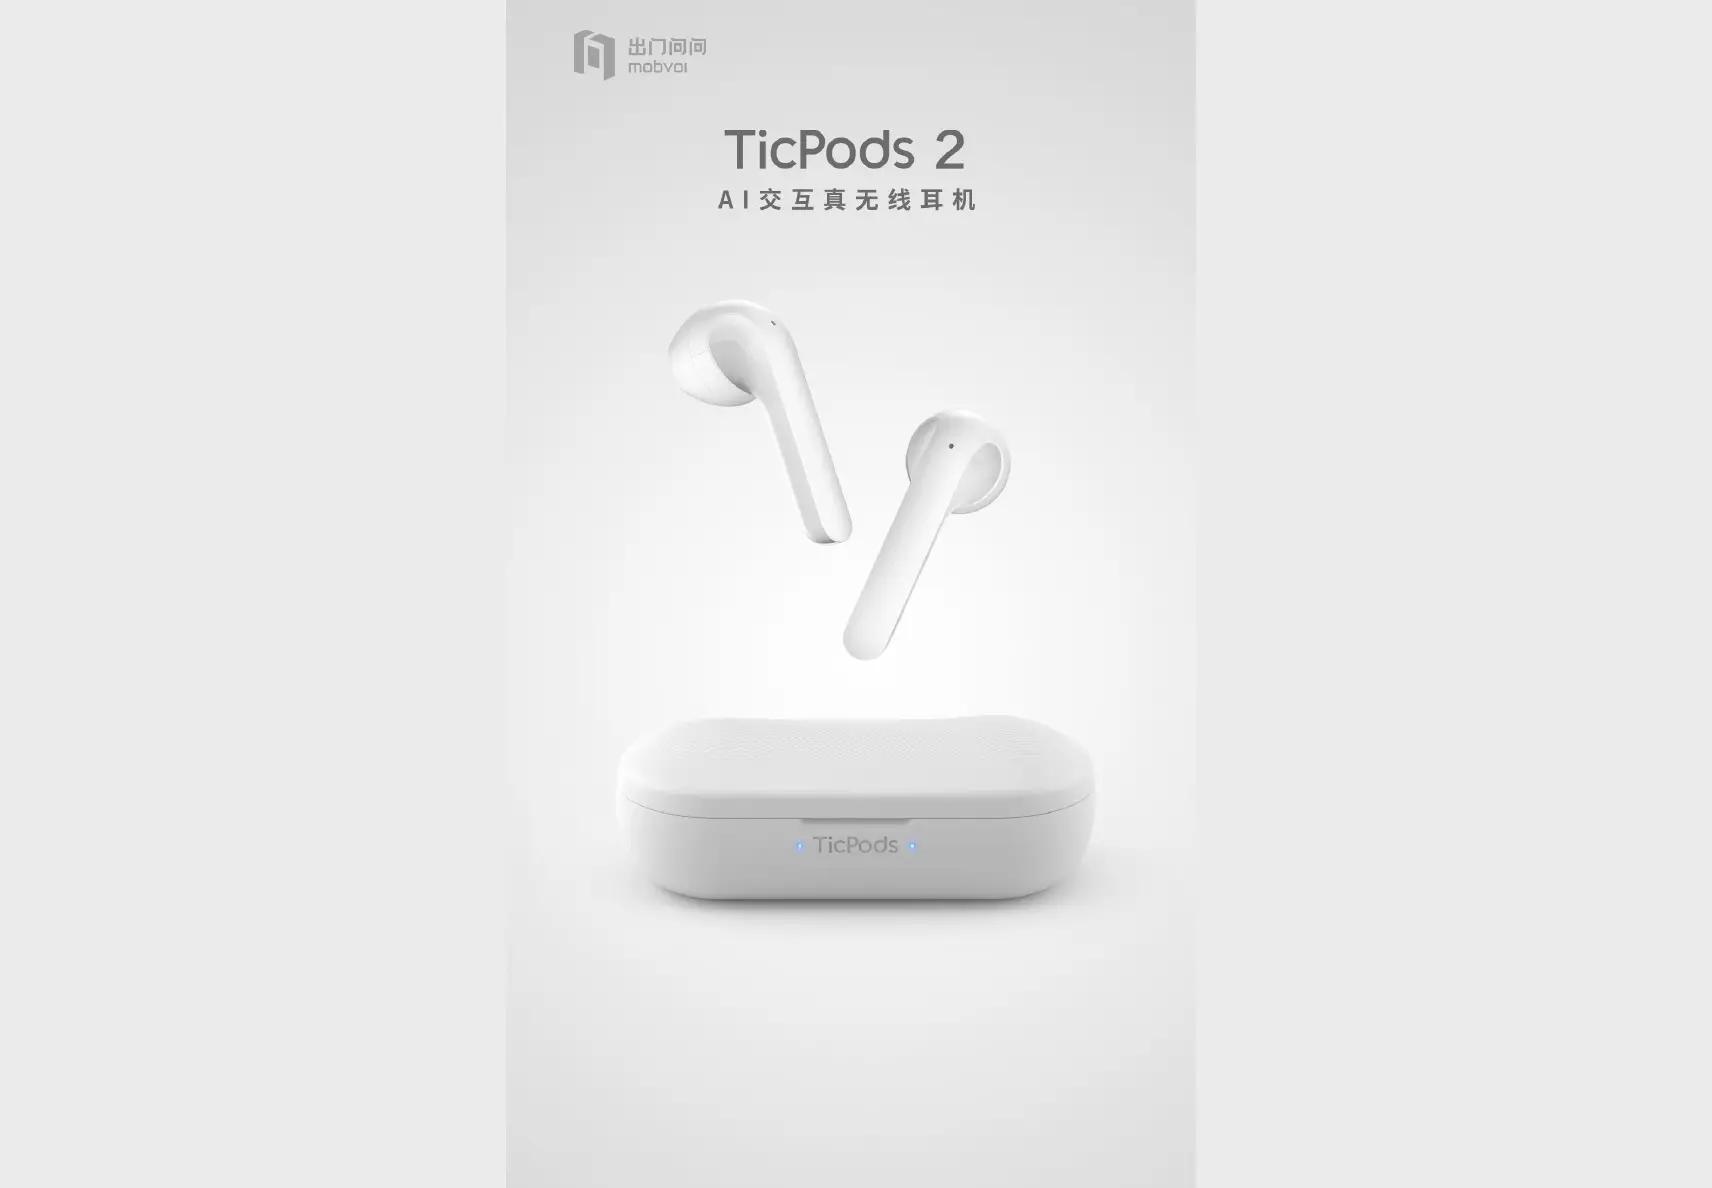 TicPods 2 and TicPods 2 Pro